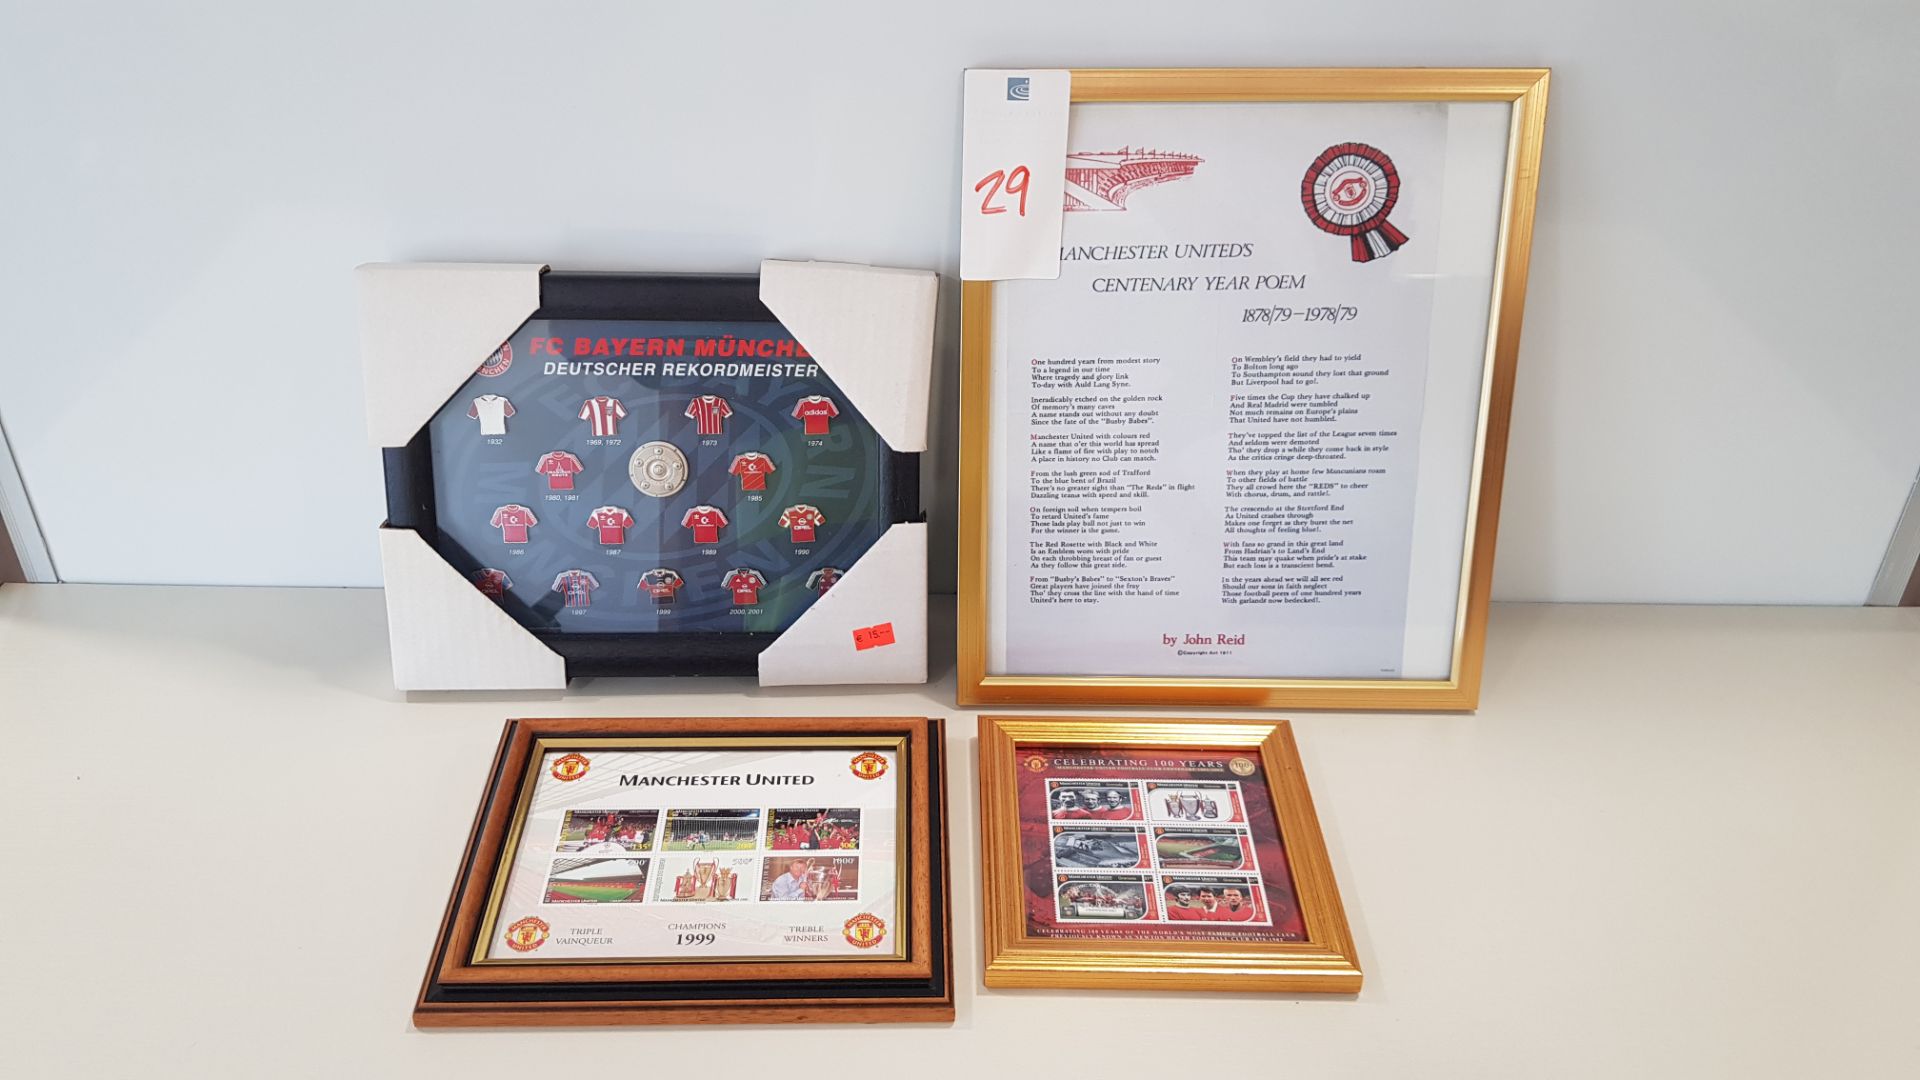 4 X PICTURES OF MANCHESTER UNITED TO INCLUDE - CENTENARY YEAR POEM, TREBLE WINNERS STAMPS,